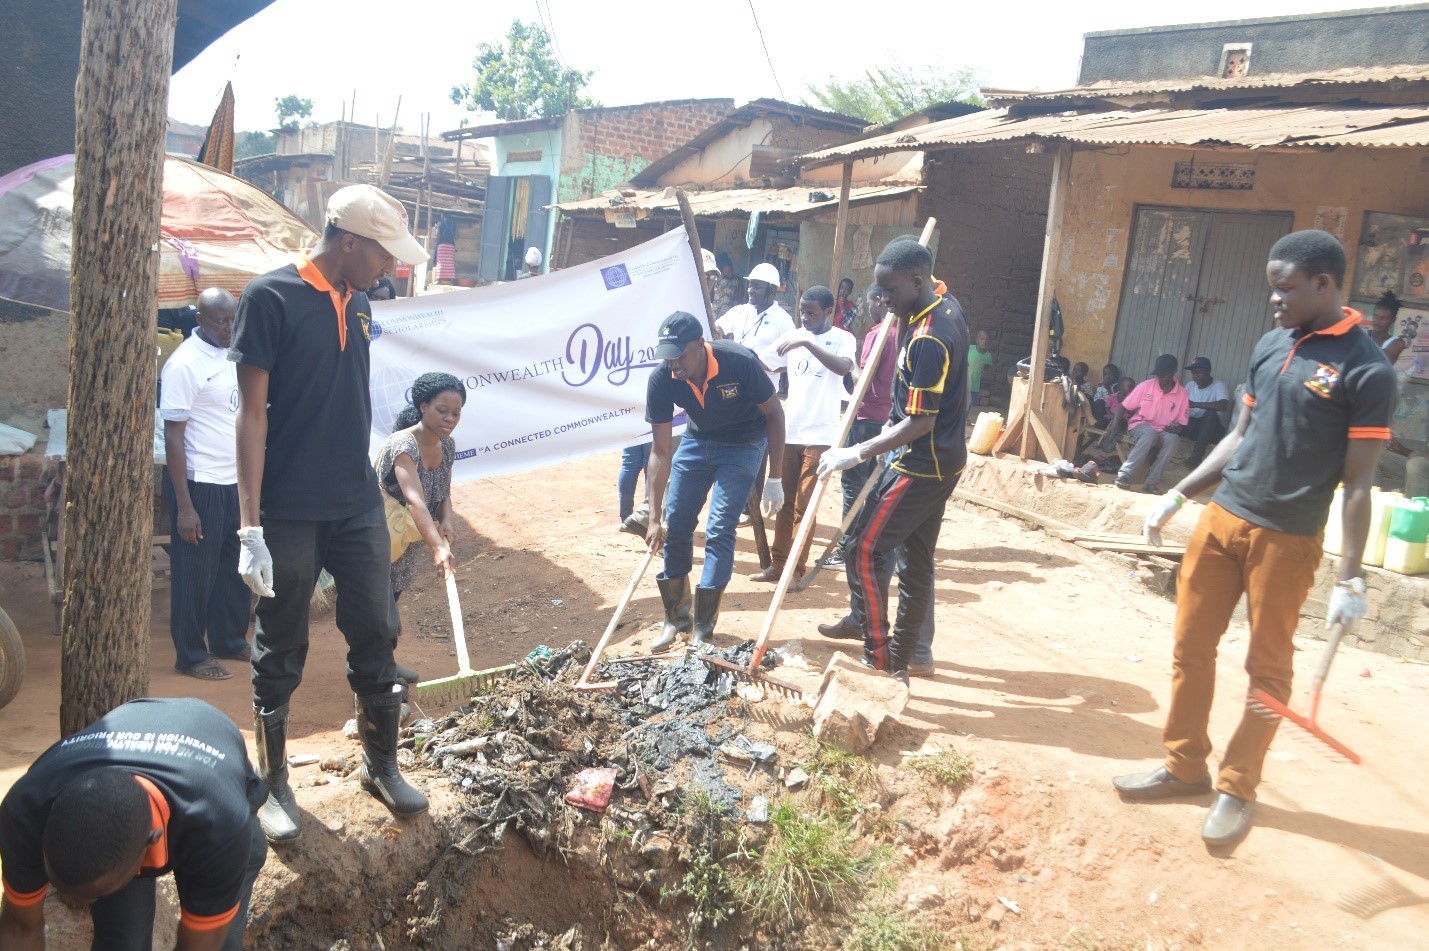 MUEHSA Students Involved in Cleaning Drive